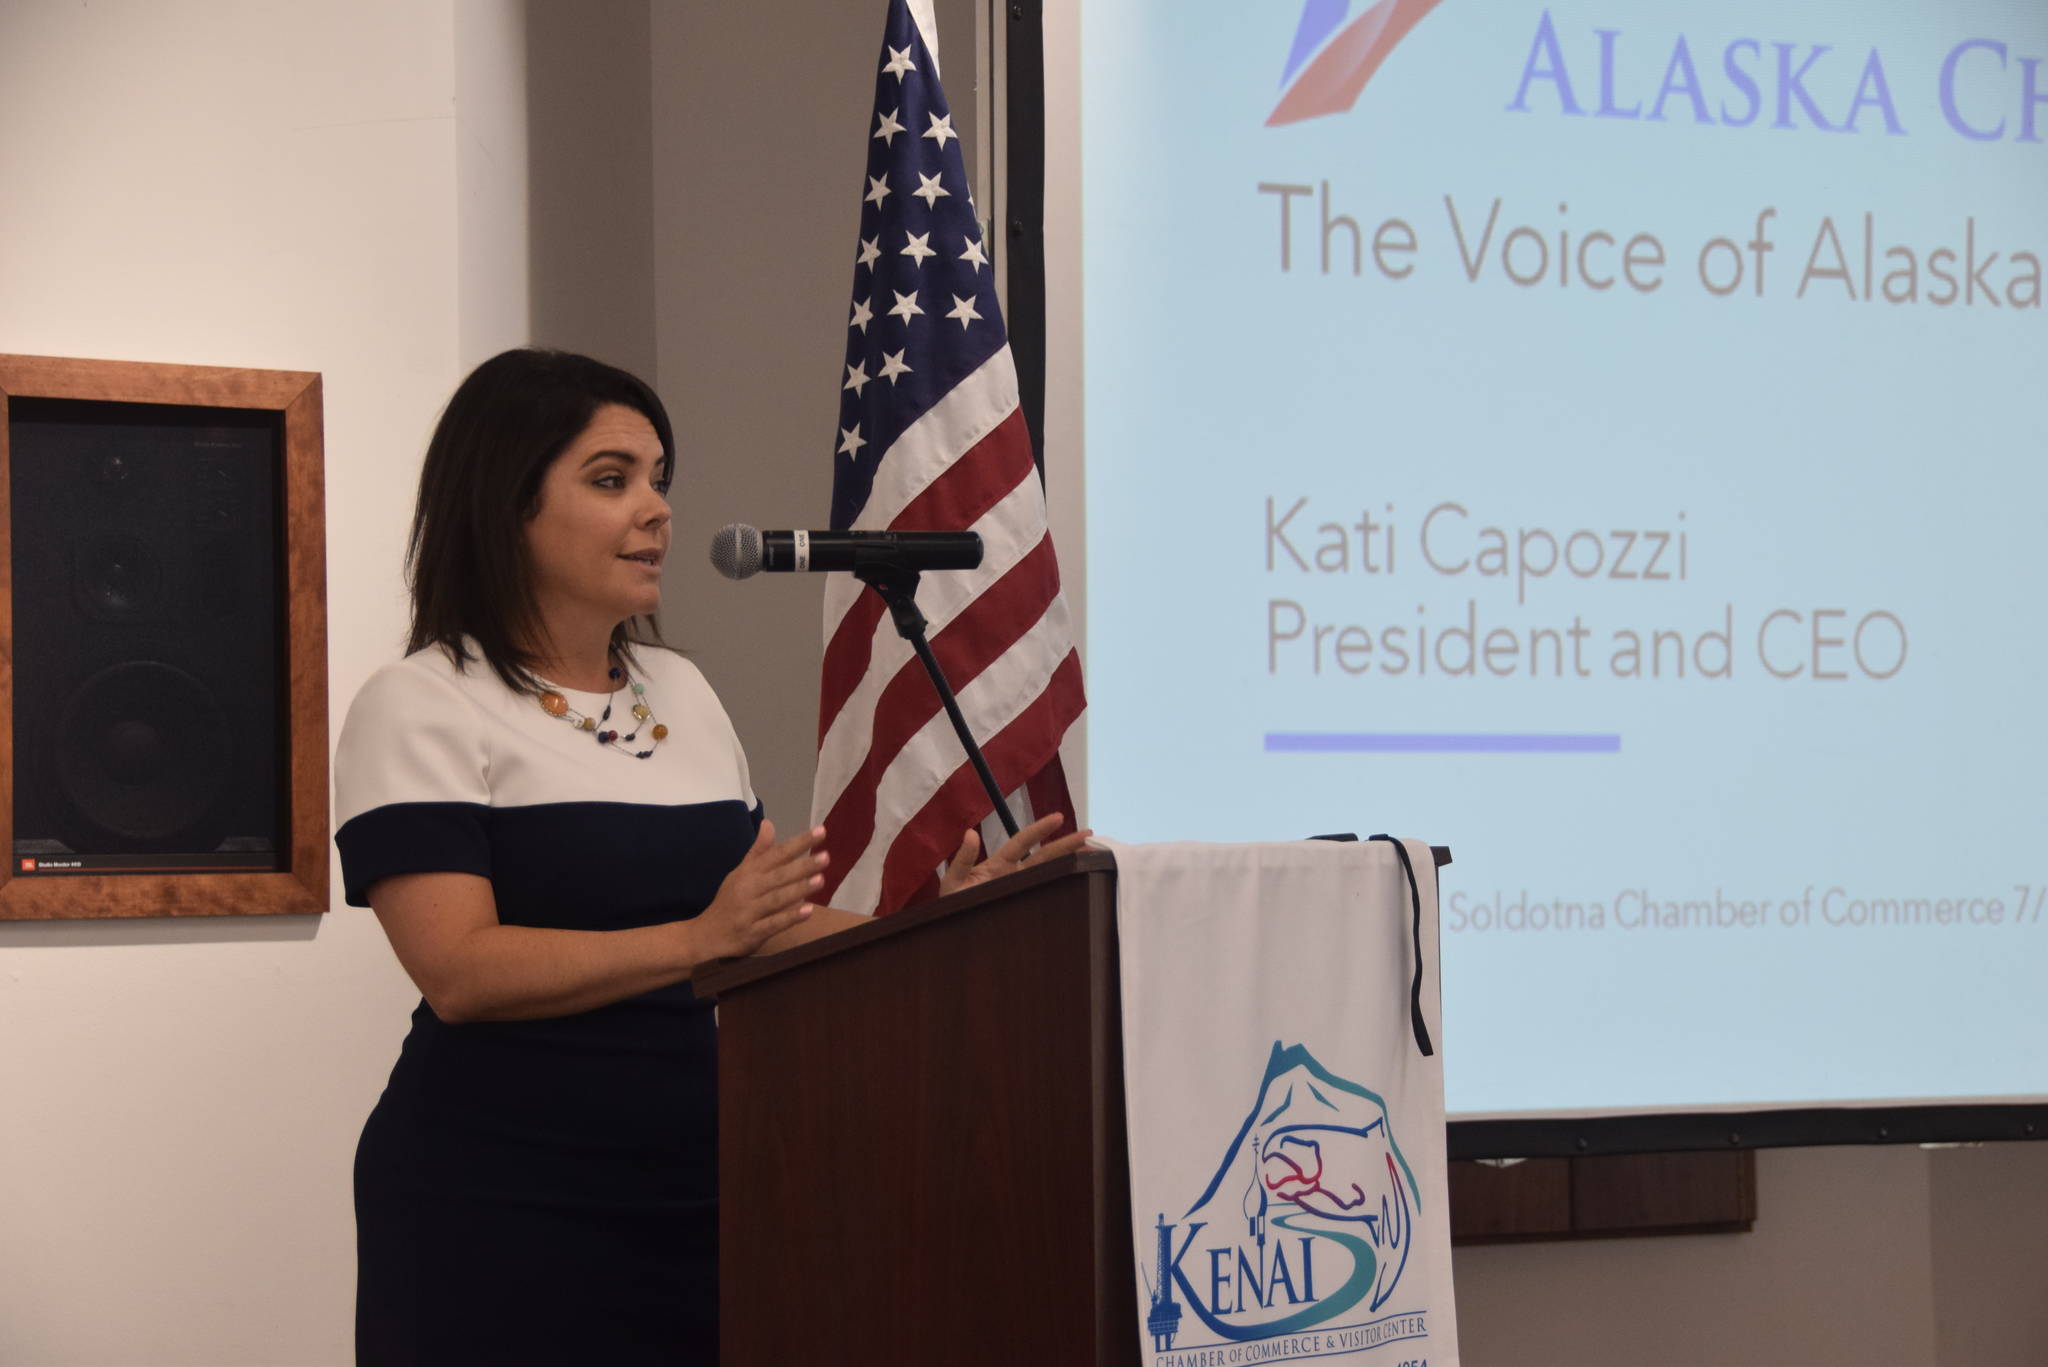 Kati Capozzi, president and CEO of the Alaska Chamber of Commerce, gives a presentation to the Kenai Chamber of Commerce on July 17, 2019. (Photo by Brian Mazurek/Peninsula Clarion)